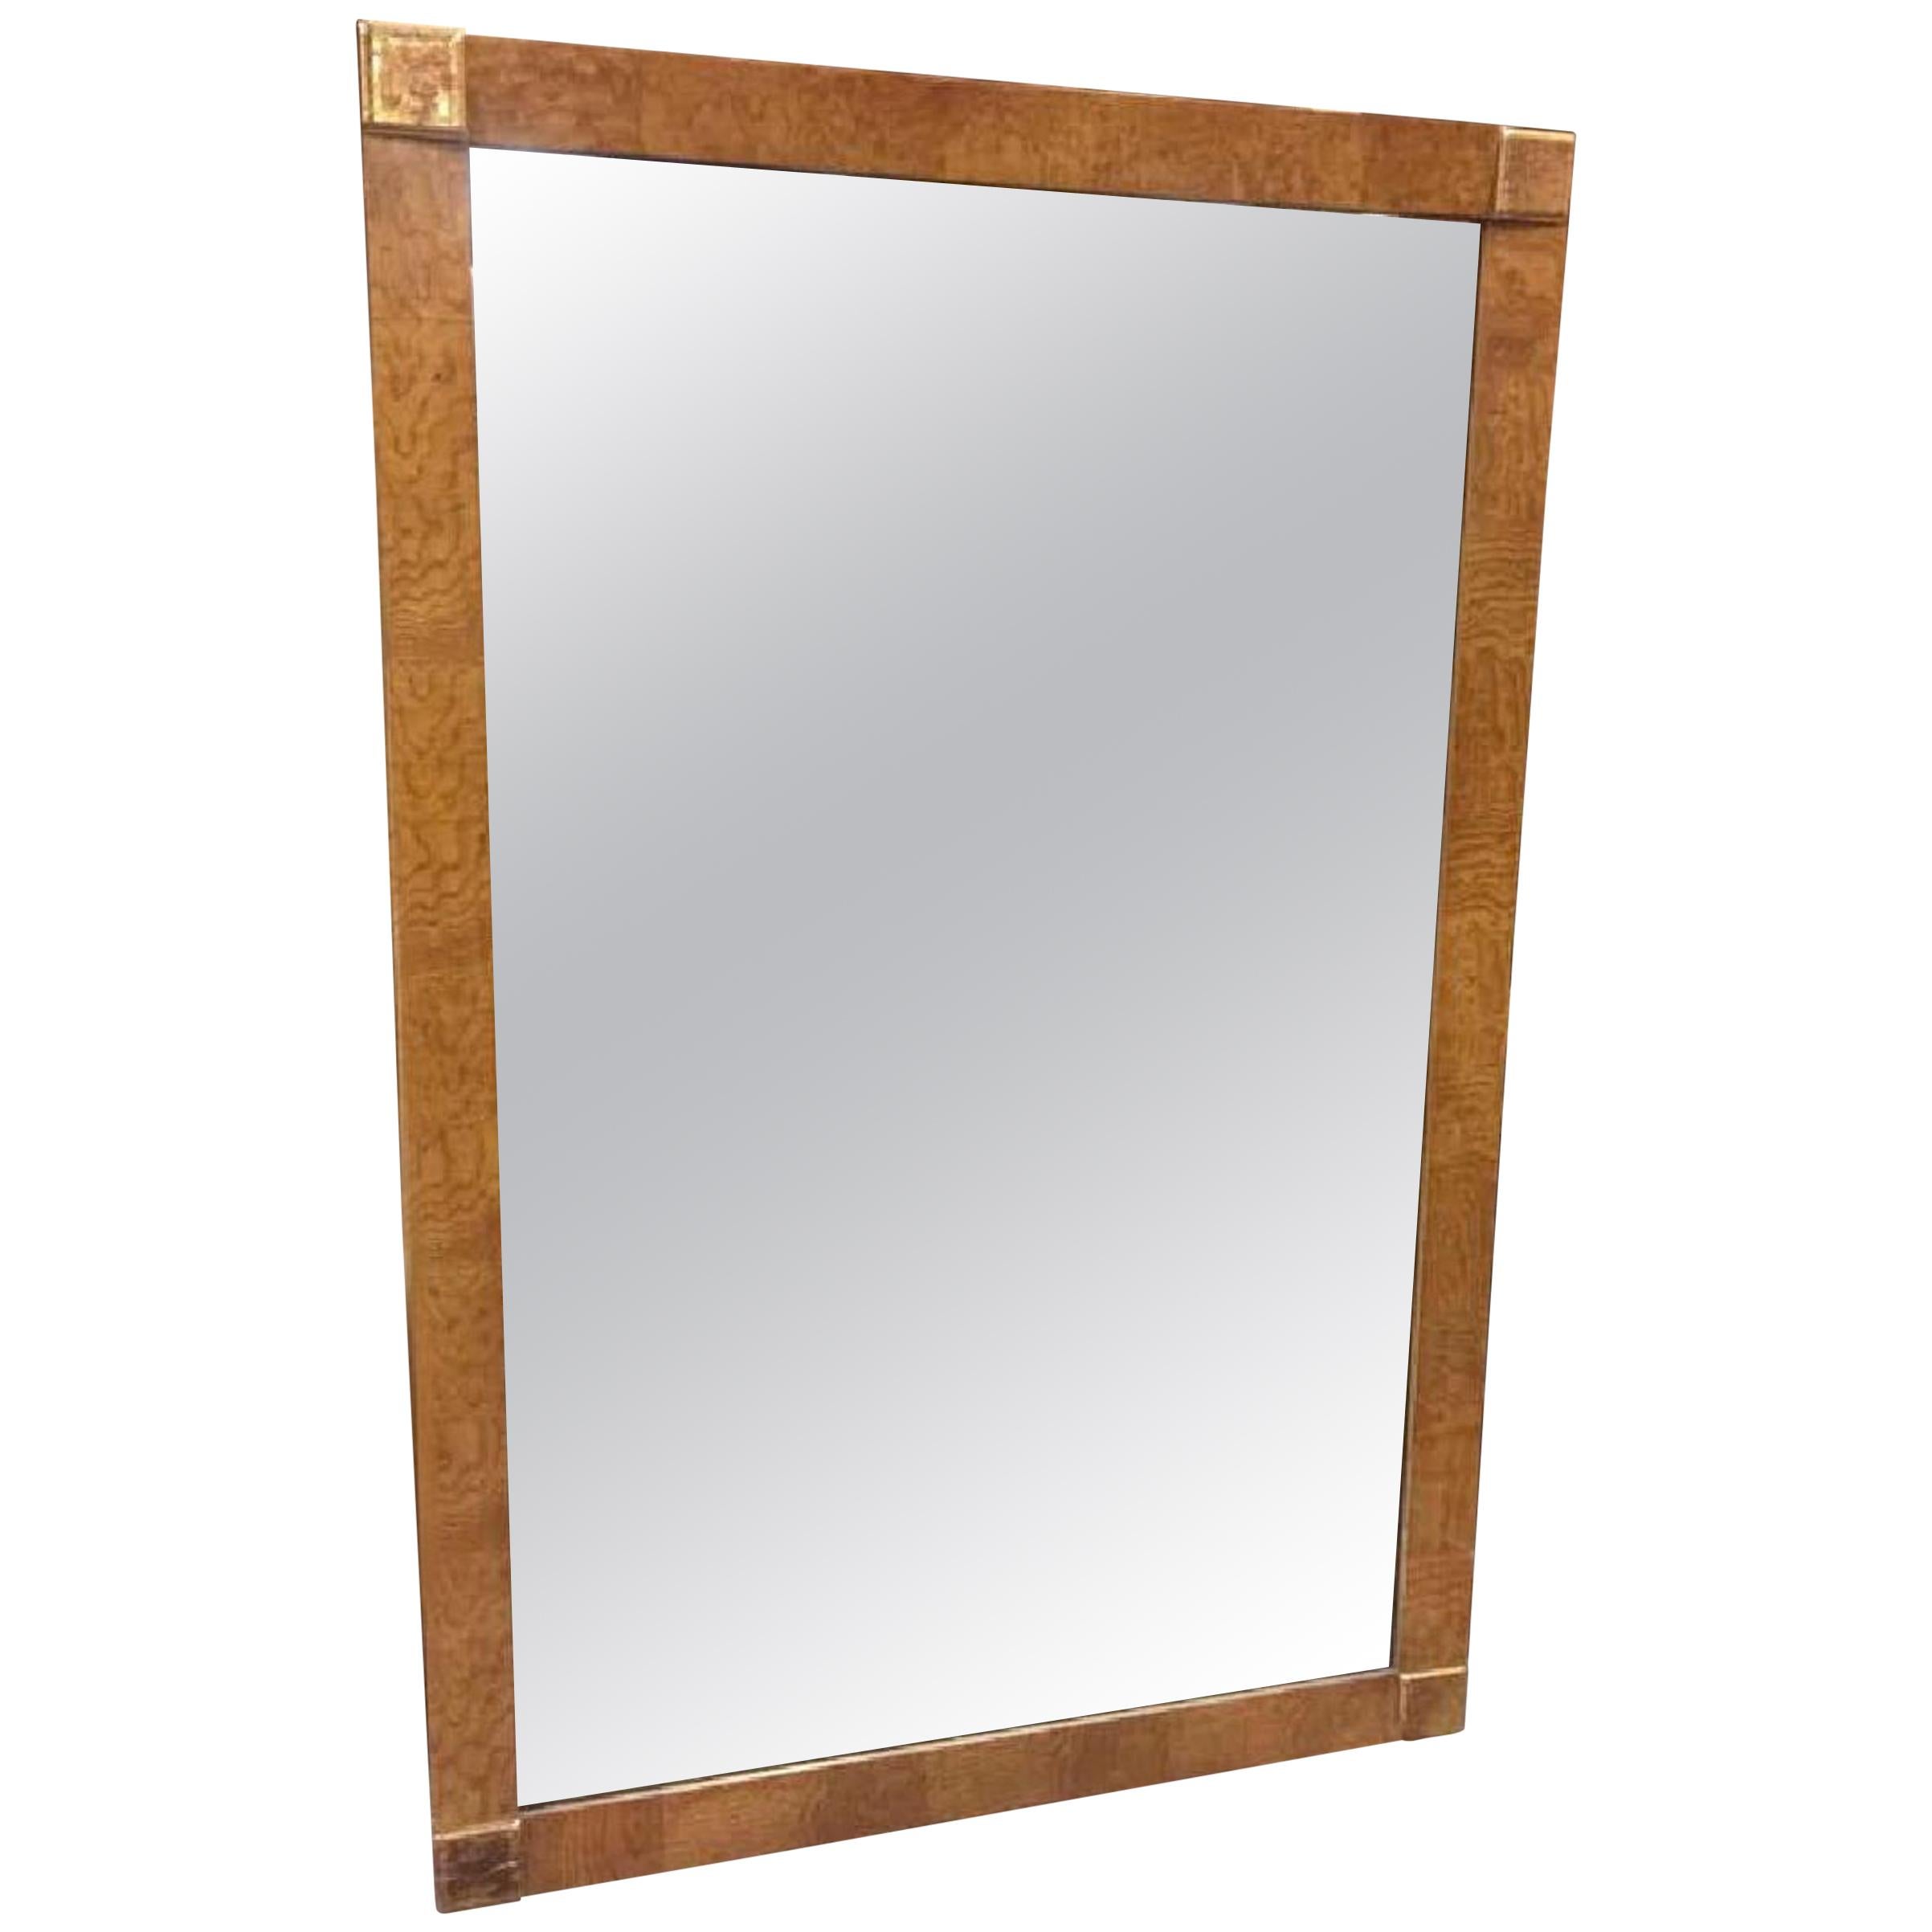 Neoclassical Revival Wood Framed Mirror